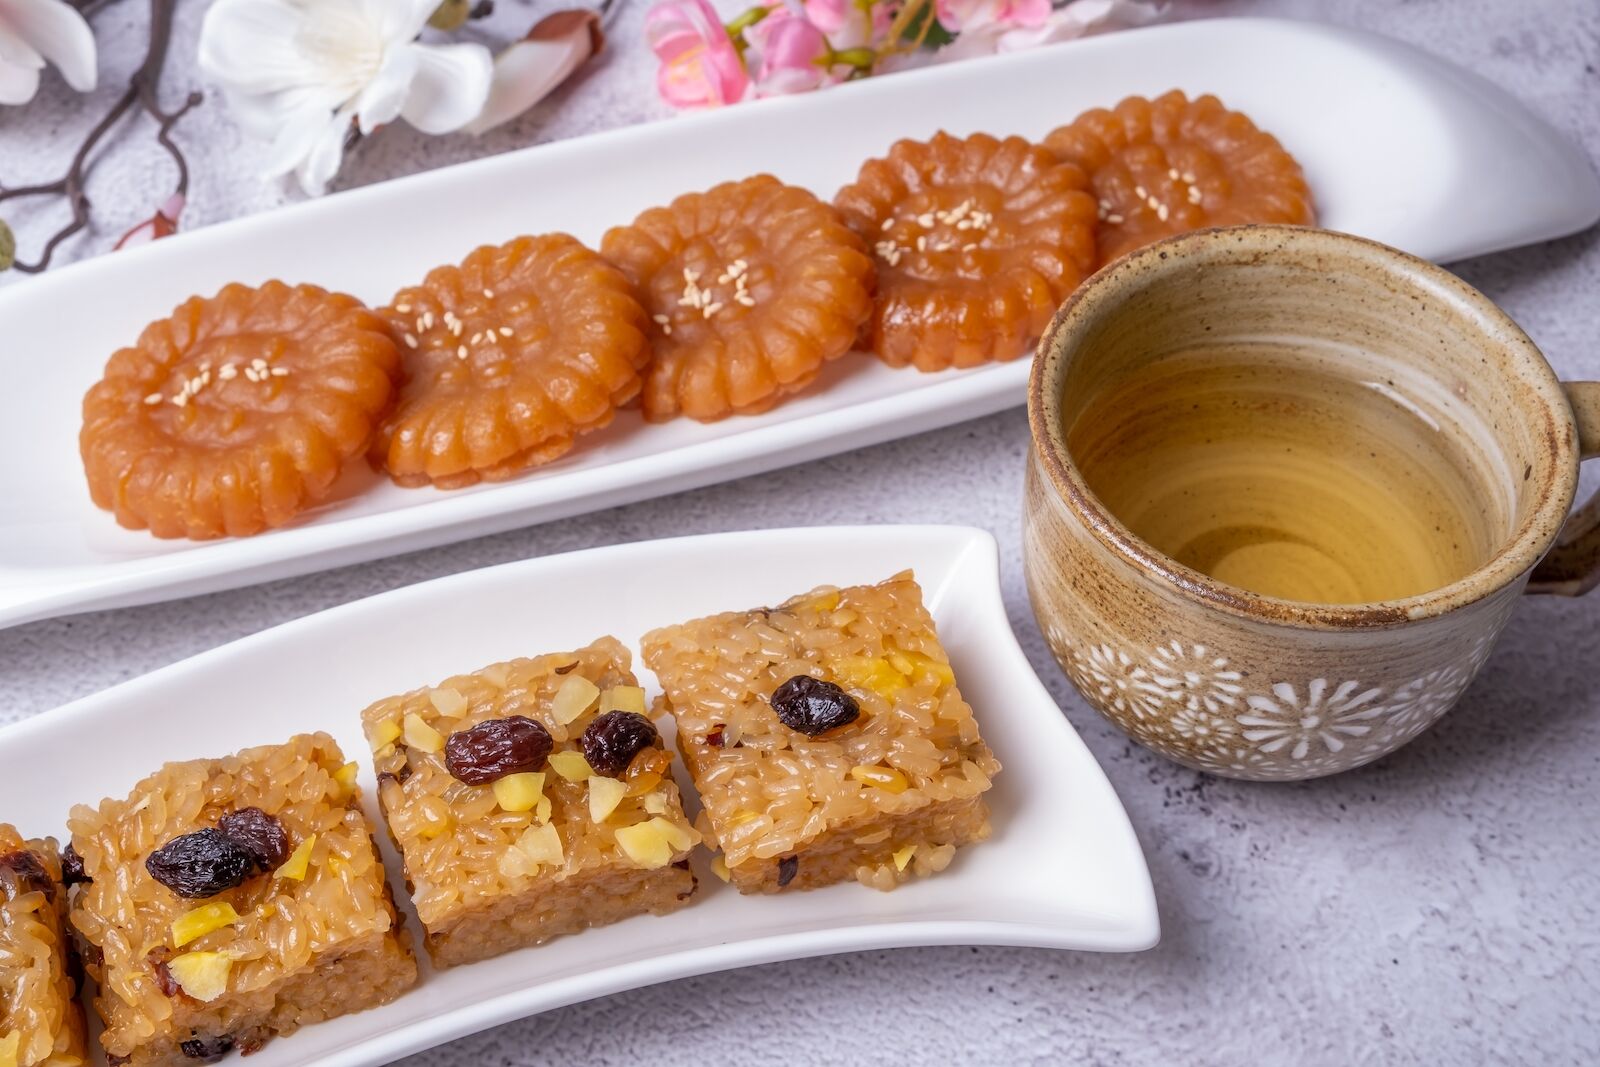 a long thin rectangular plate of yaksik, or sticky rice cakes, with red dates, next to a cup of tea and plate of honey cookies